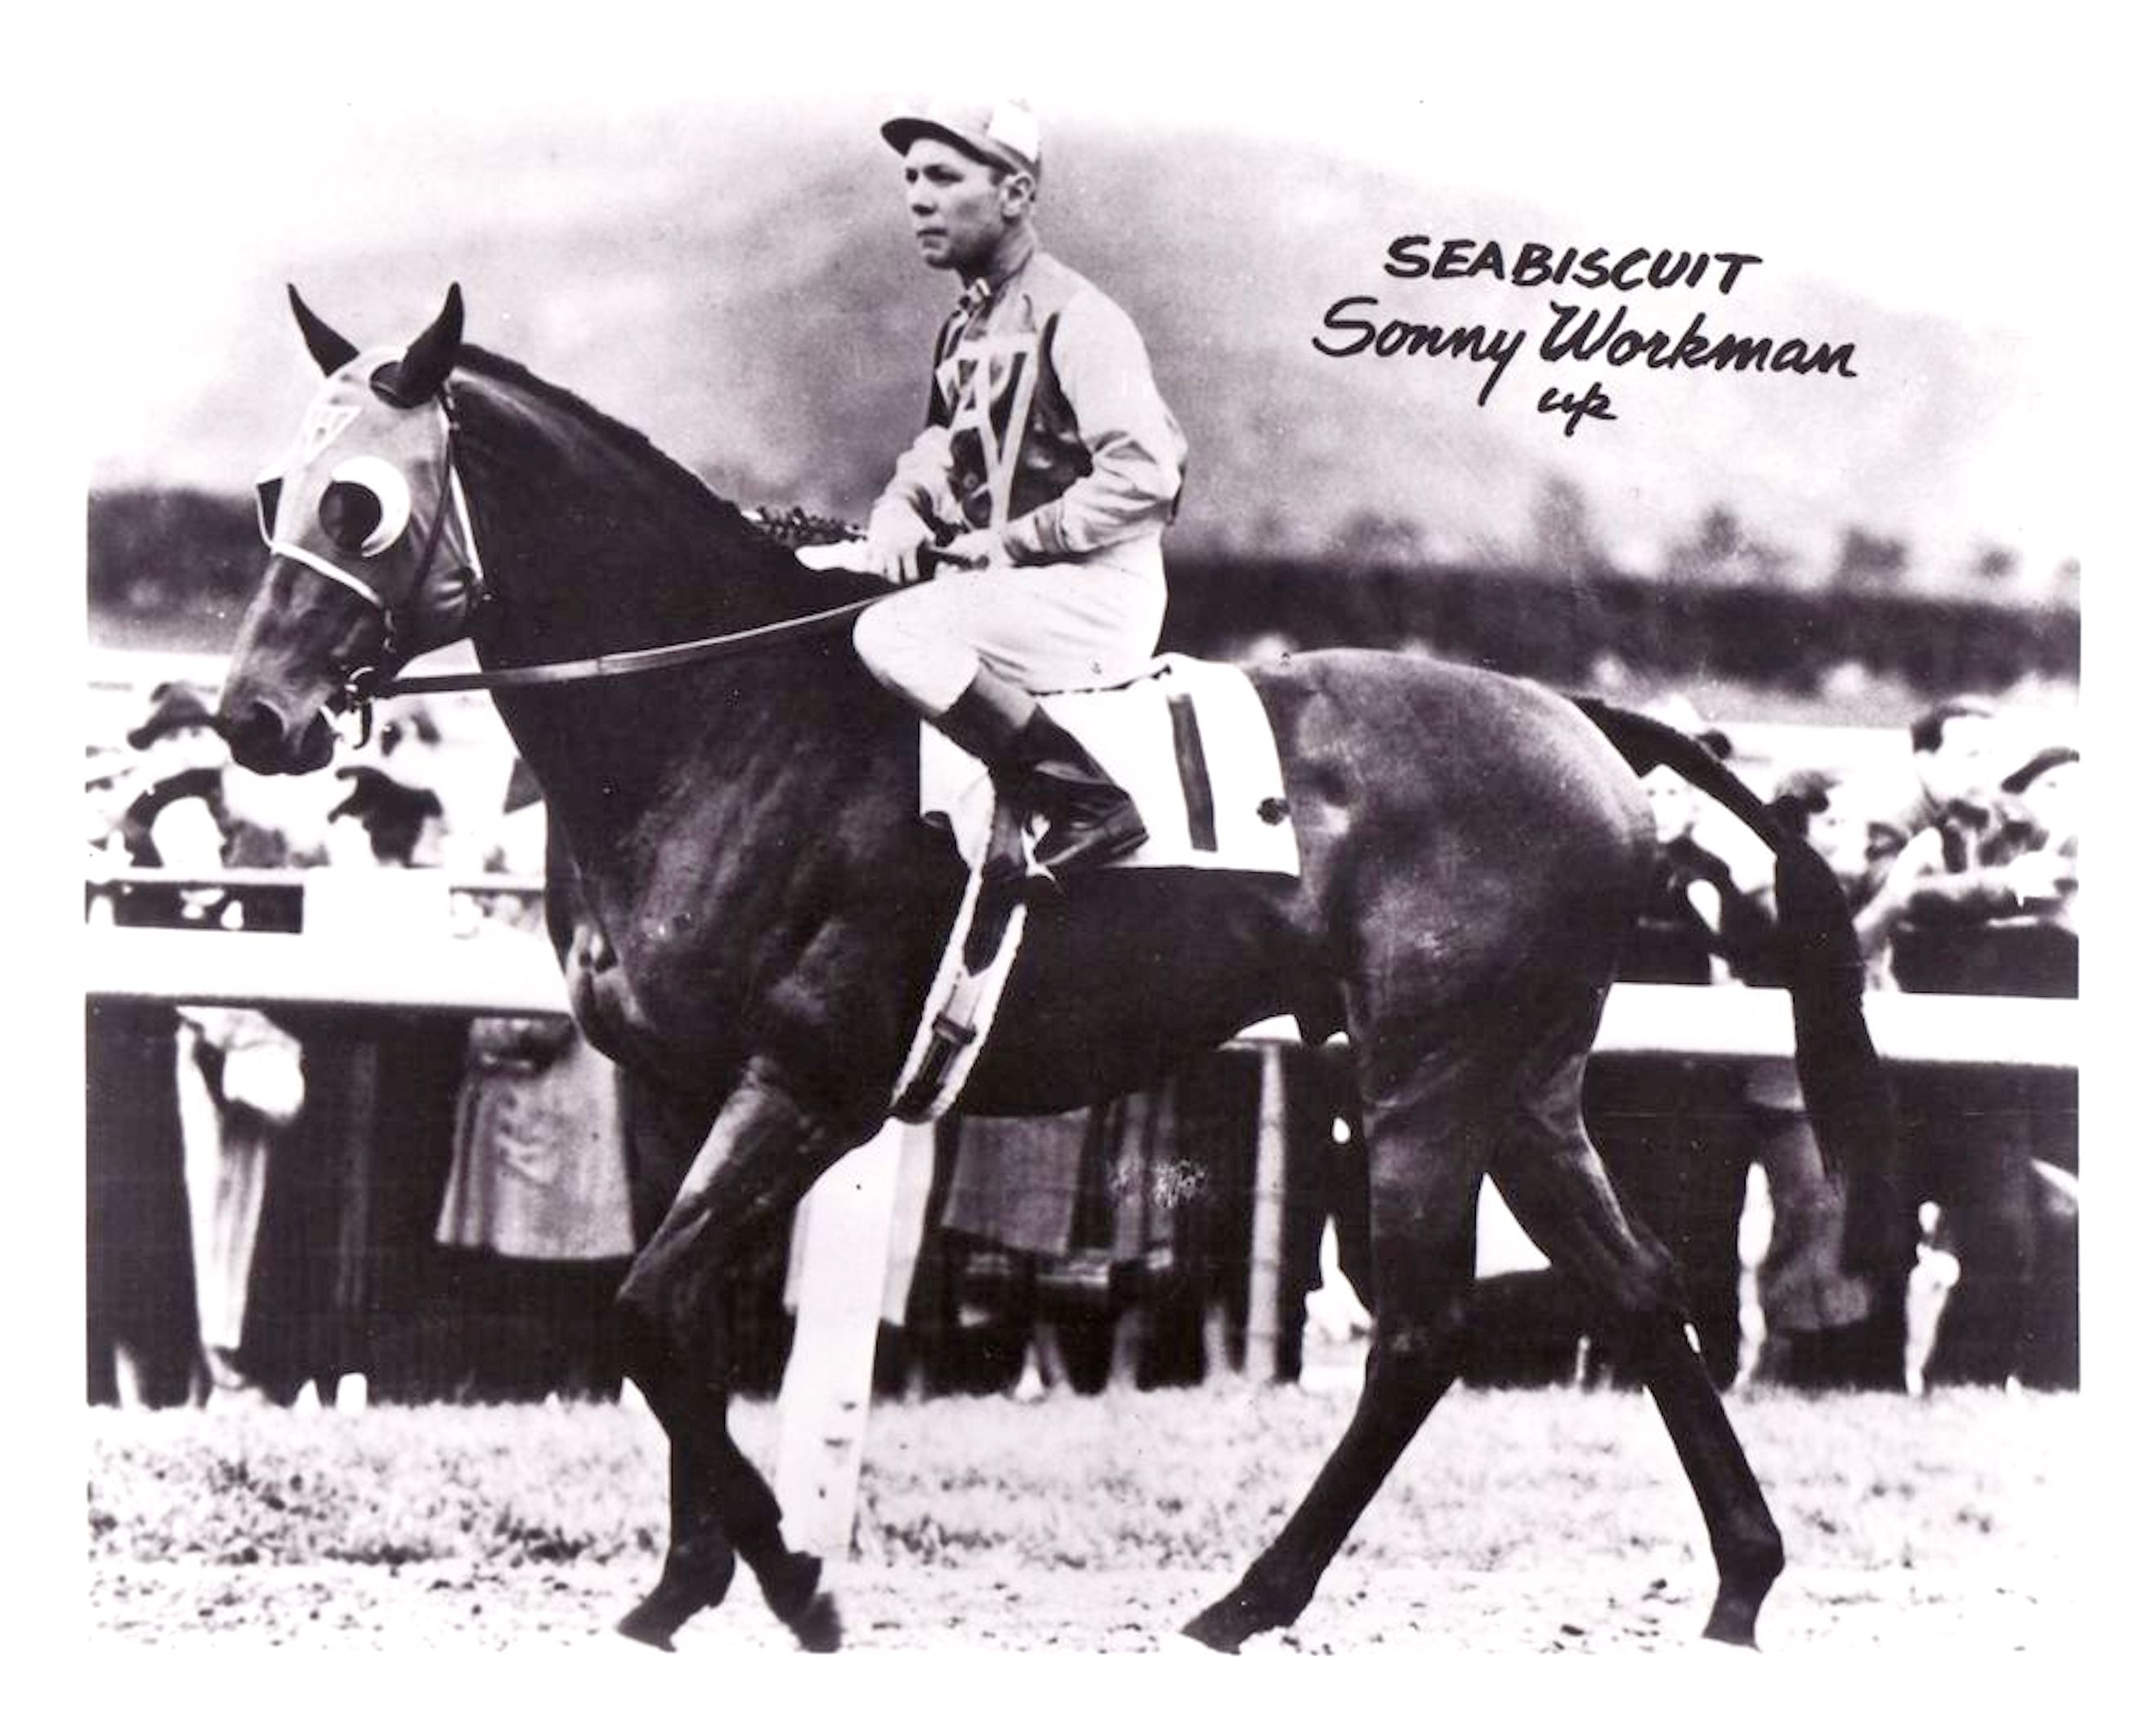 Seabiscuit with Raymond Workman up (C. C. Cook)